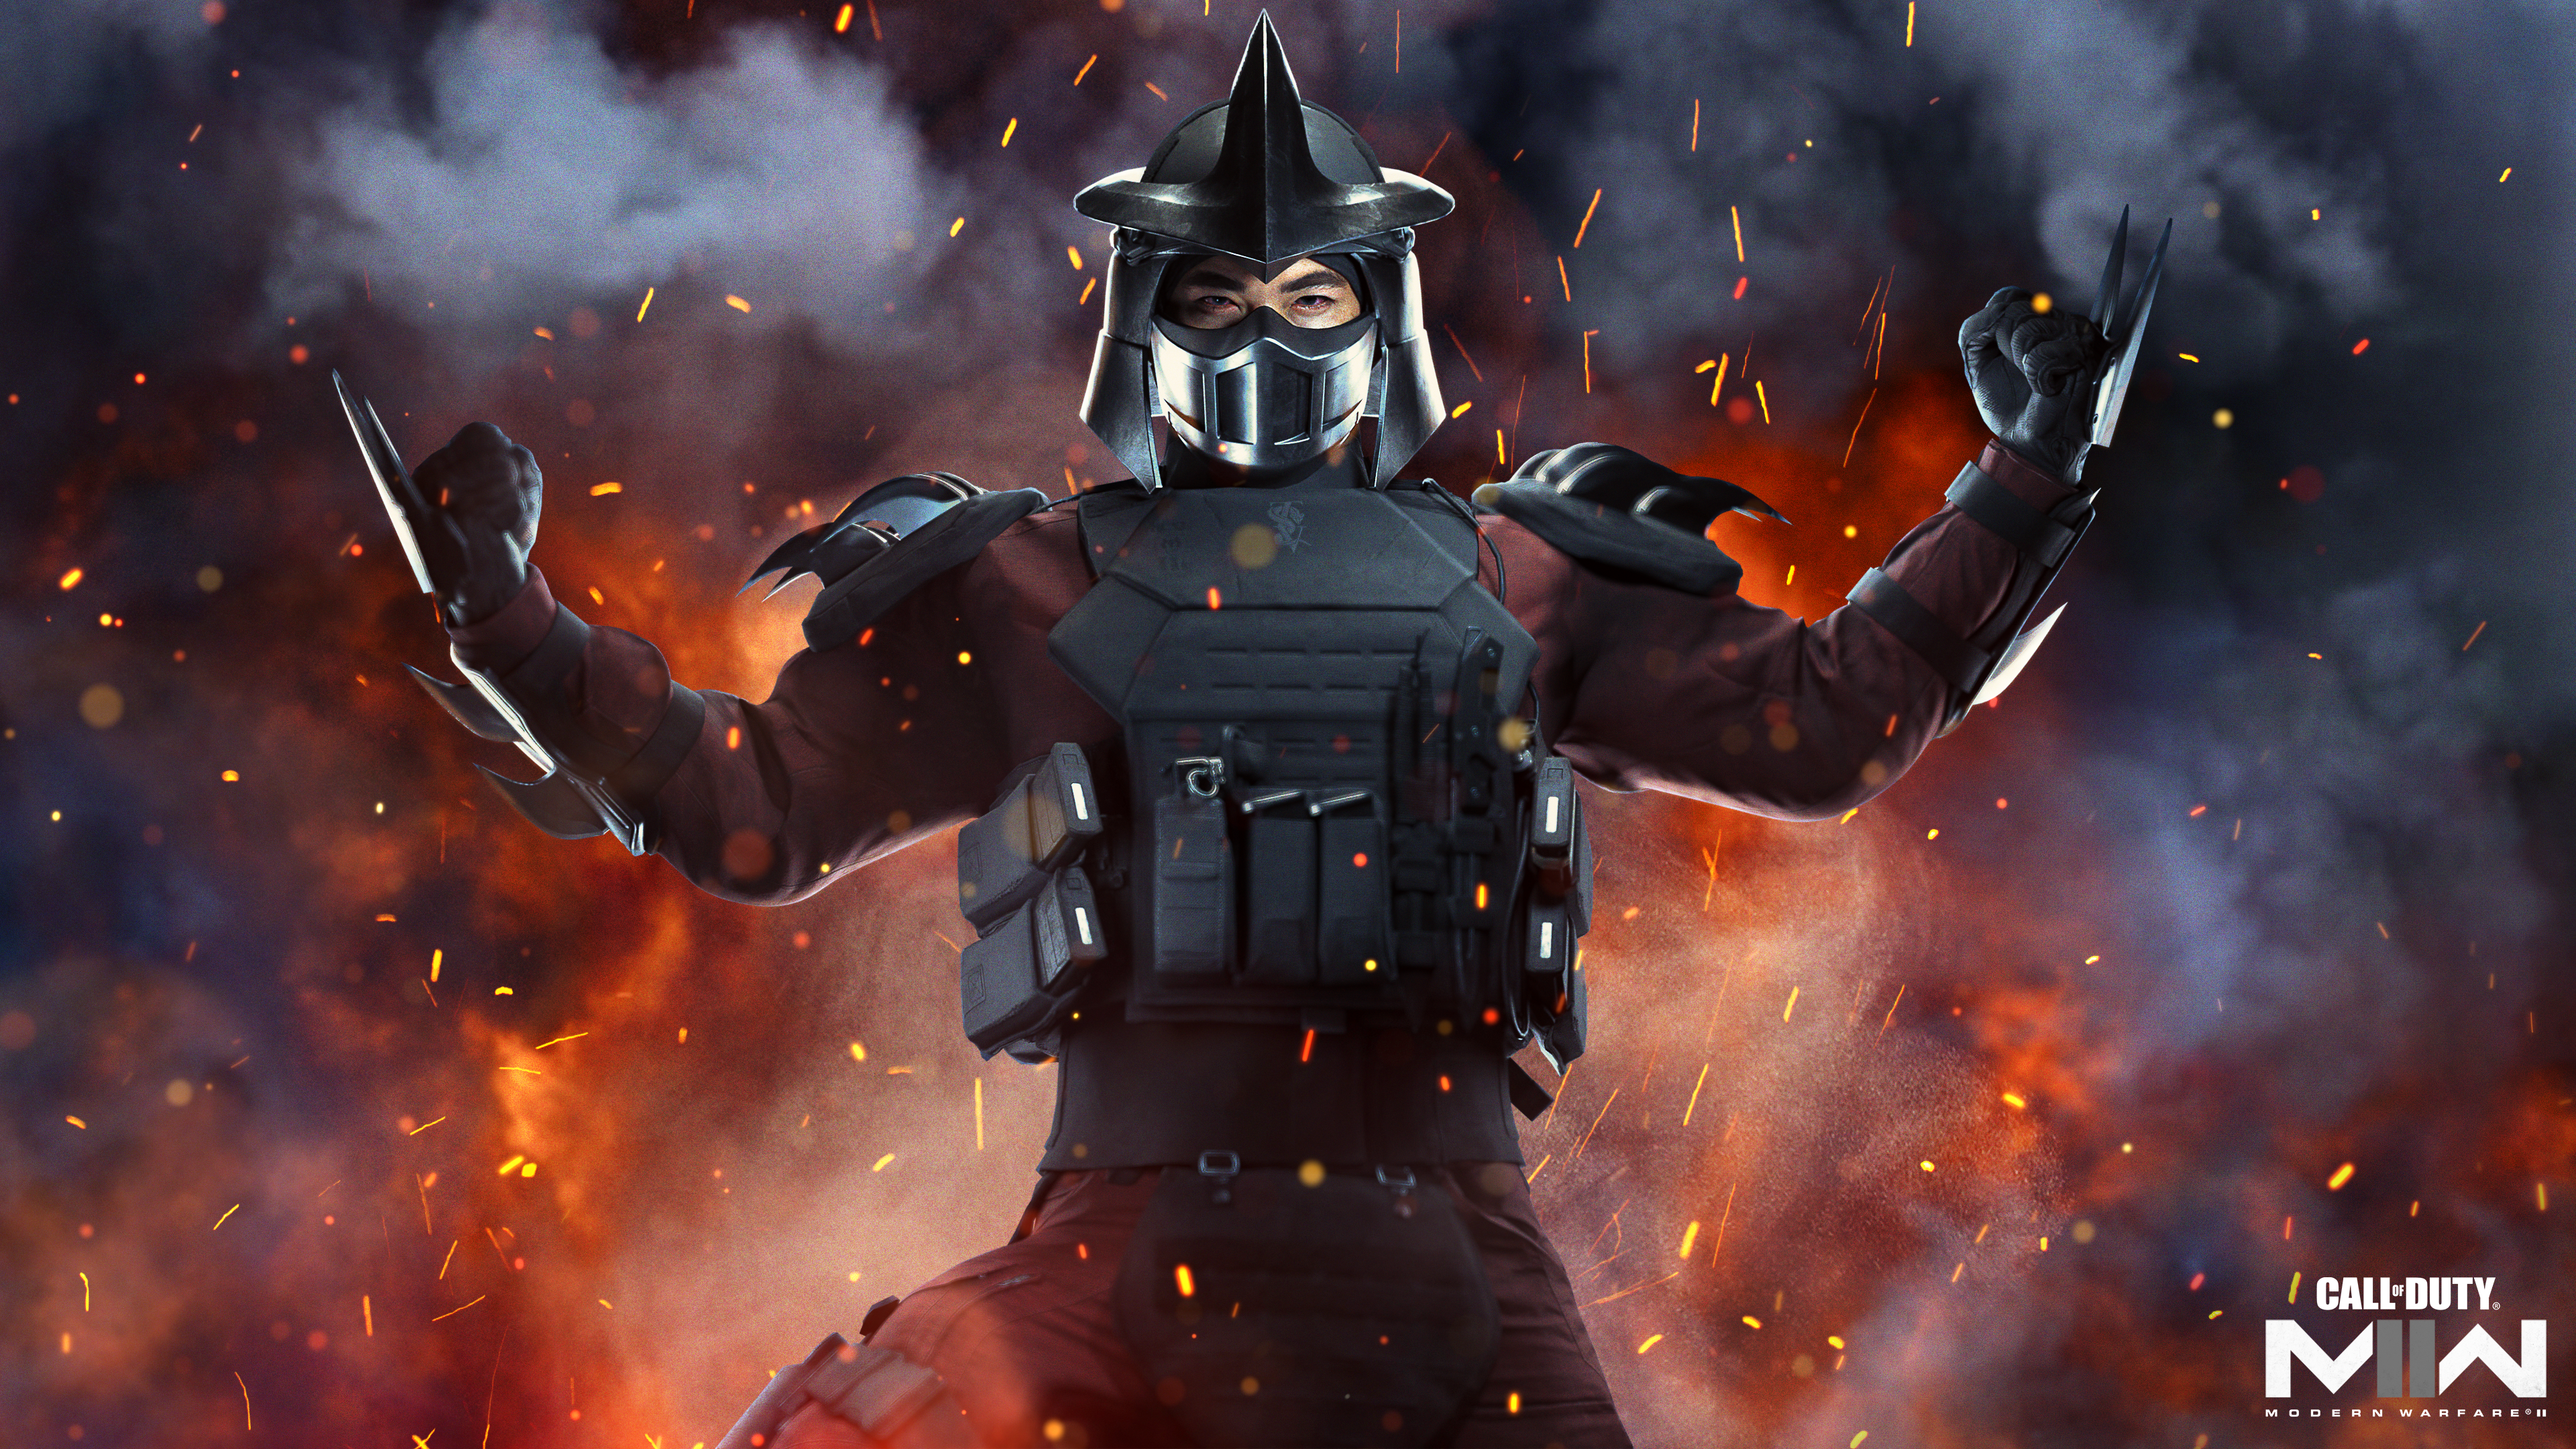 The Shredder makes his series debut in Call of Duty: Modern Warfare II (2022), Activision Blizzard